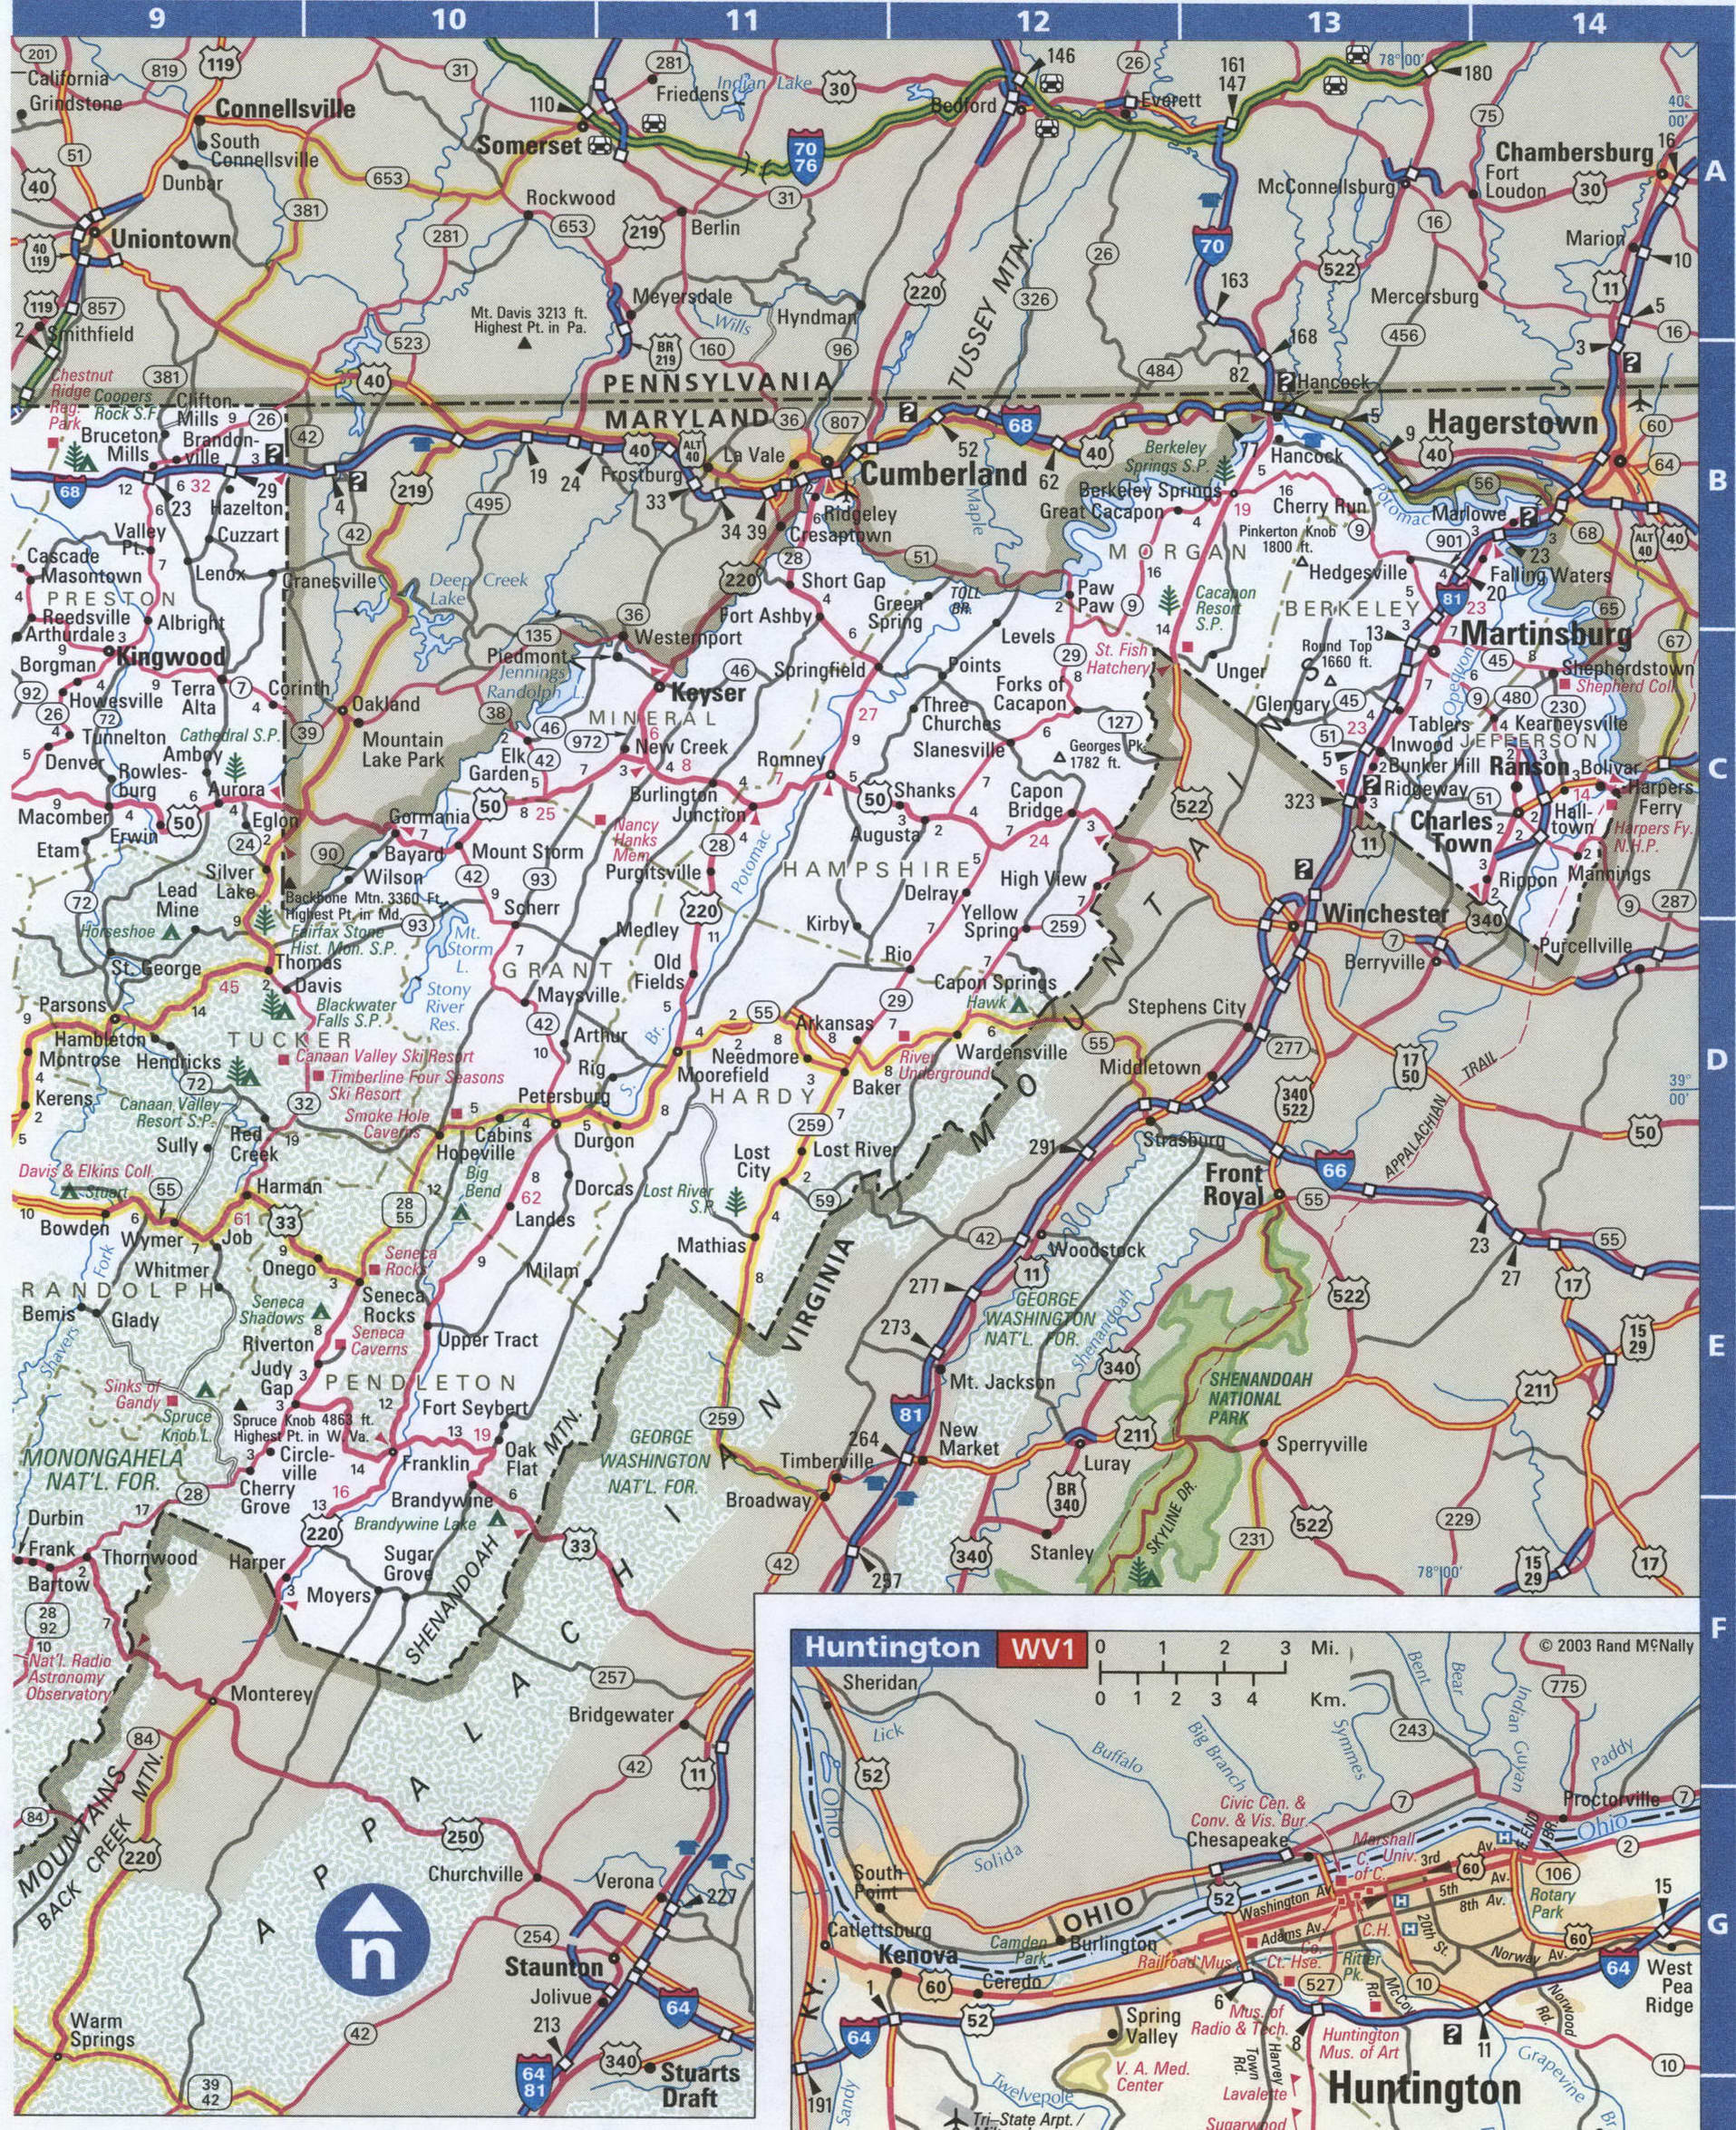 West Virginia detailed map